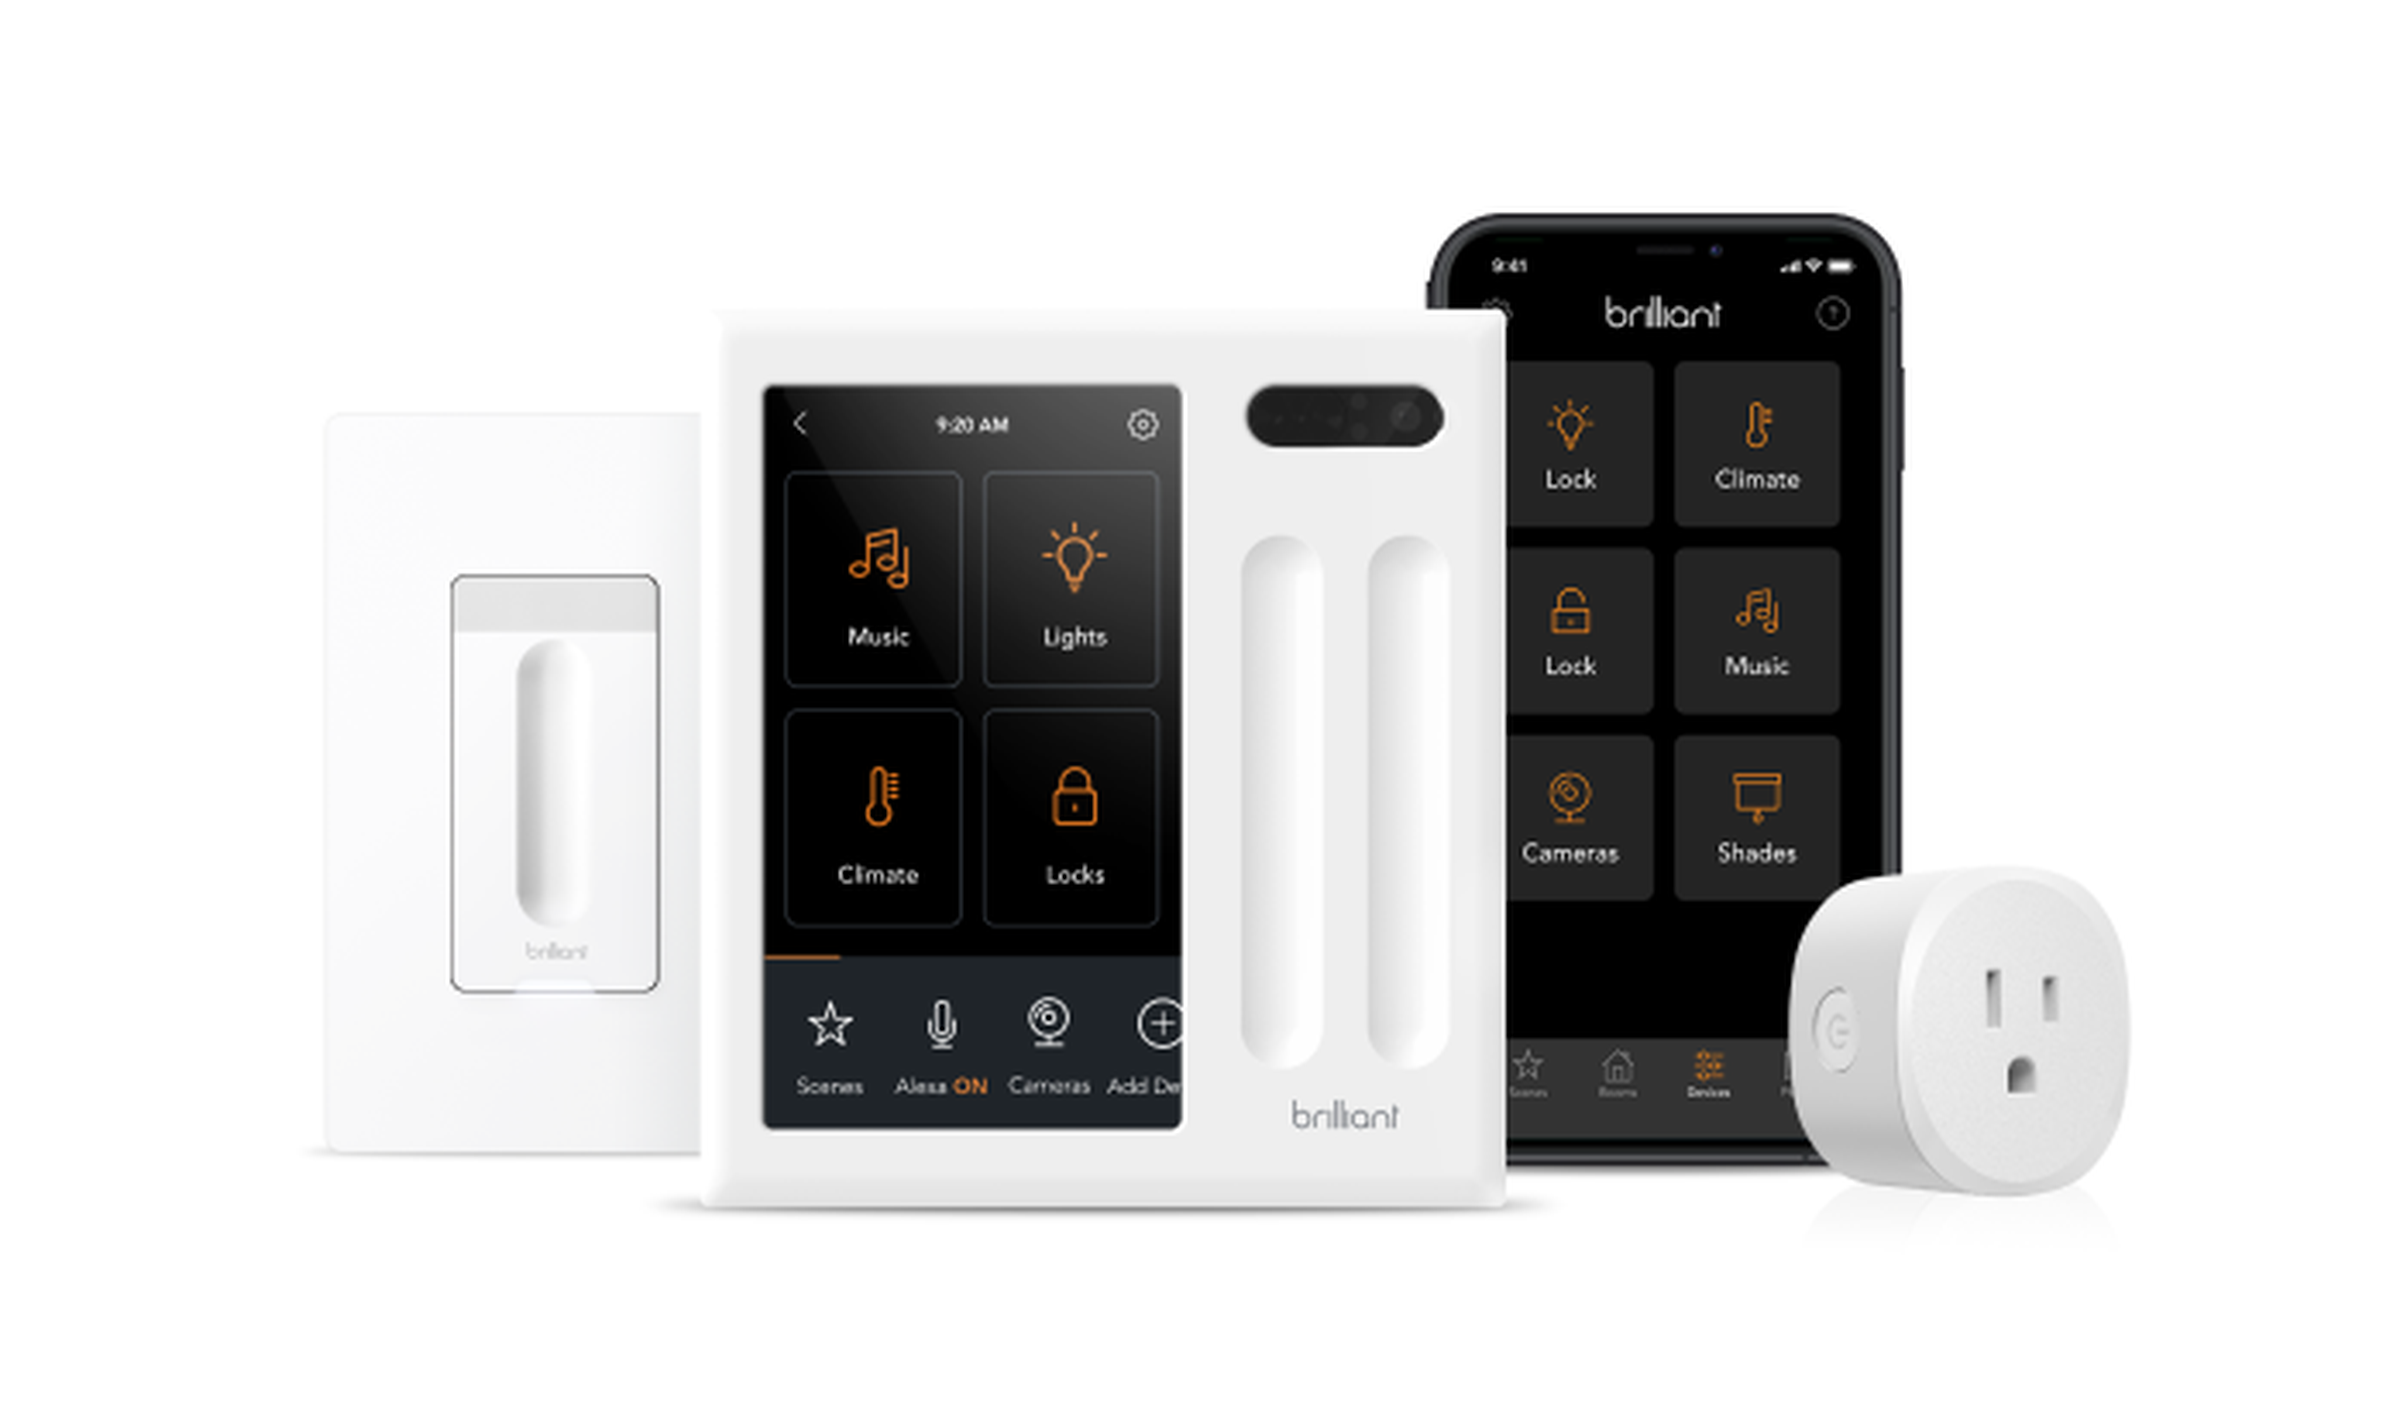 Brilliant manufactured smart home control panels, smart dimmer switches, and smart plugs that work locally over Bluetooth mesh and with Brilliant’s app.